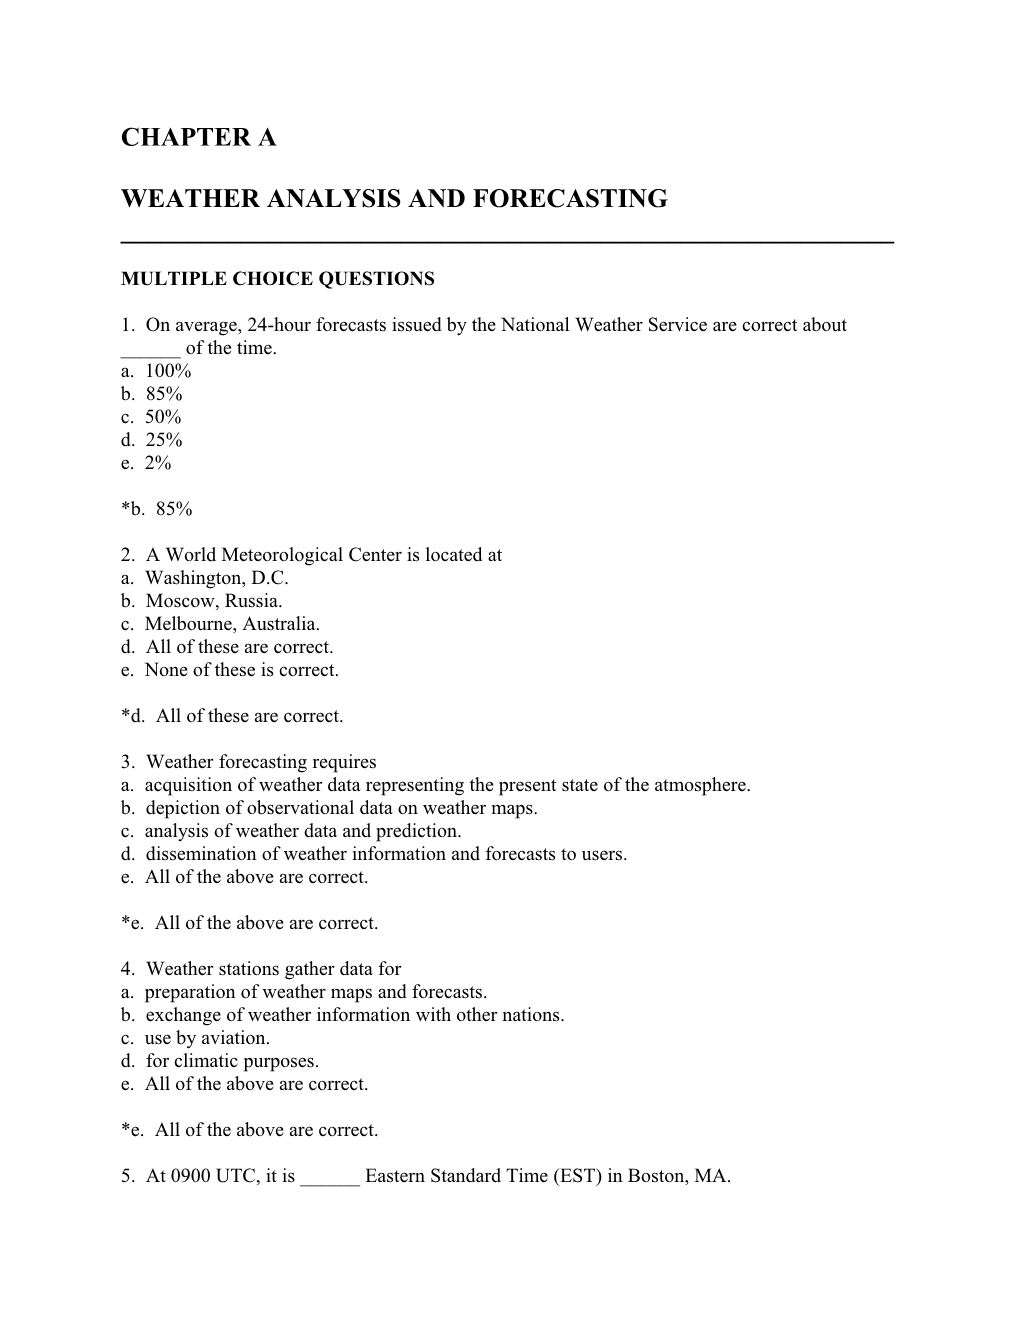 Weather Analysis and Forecasting